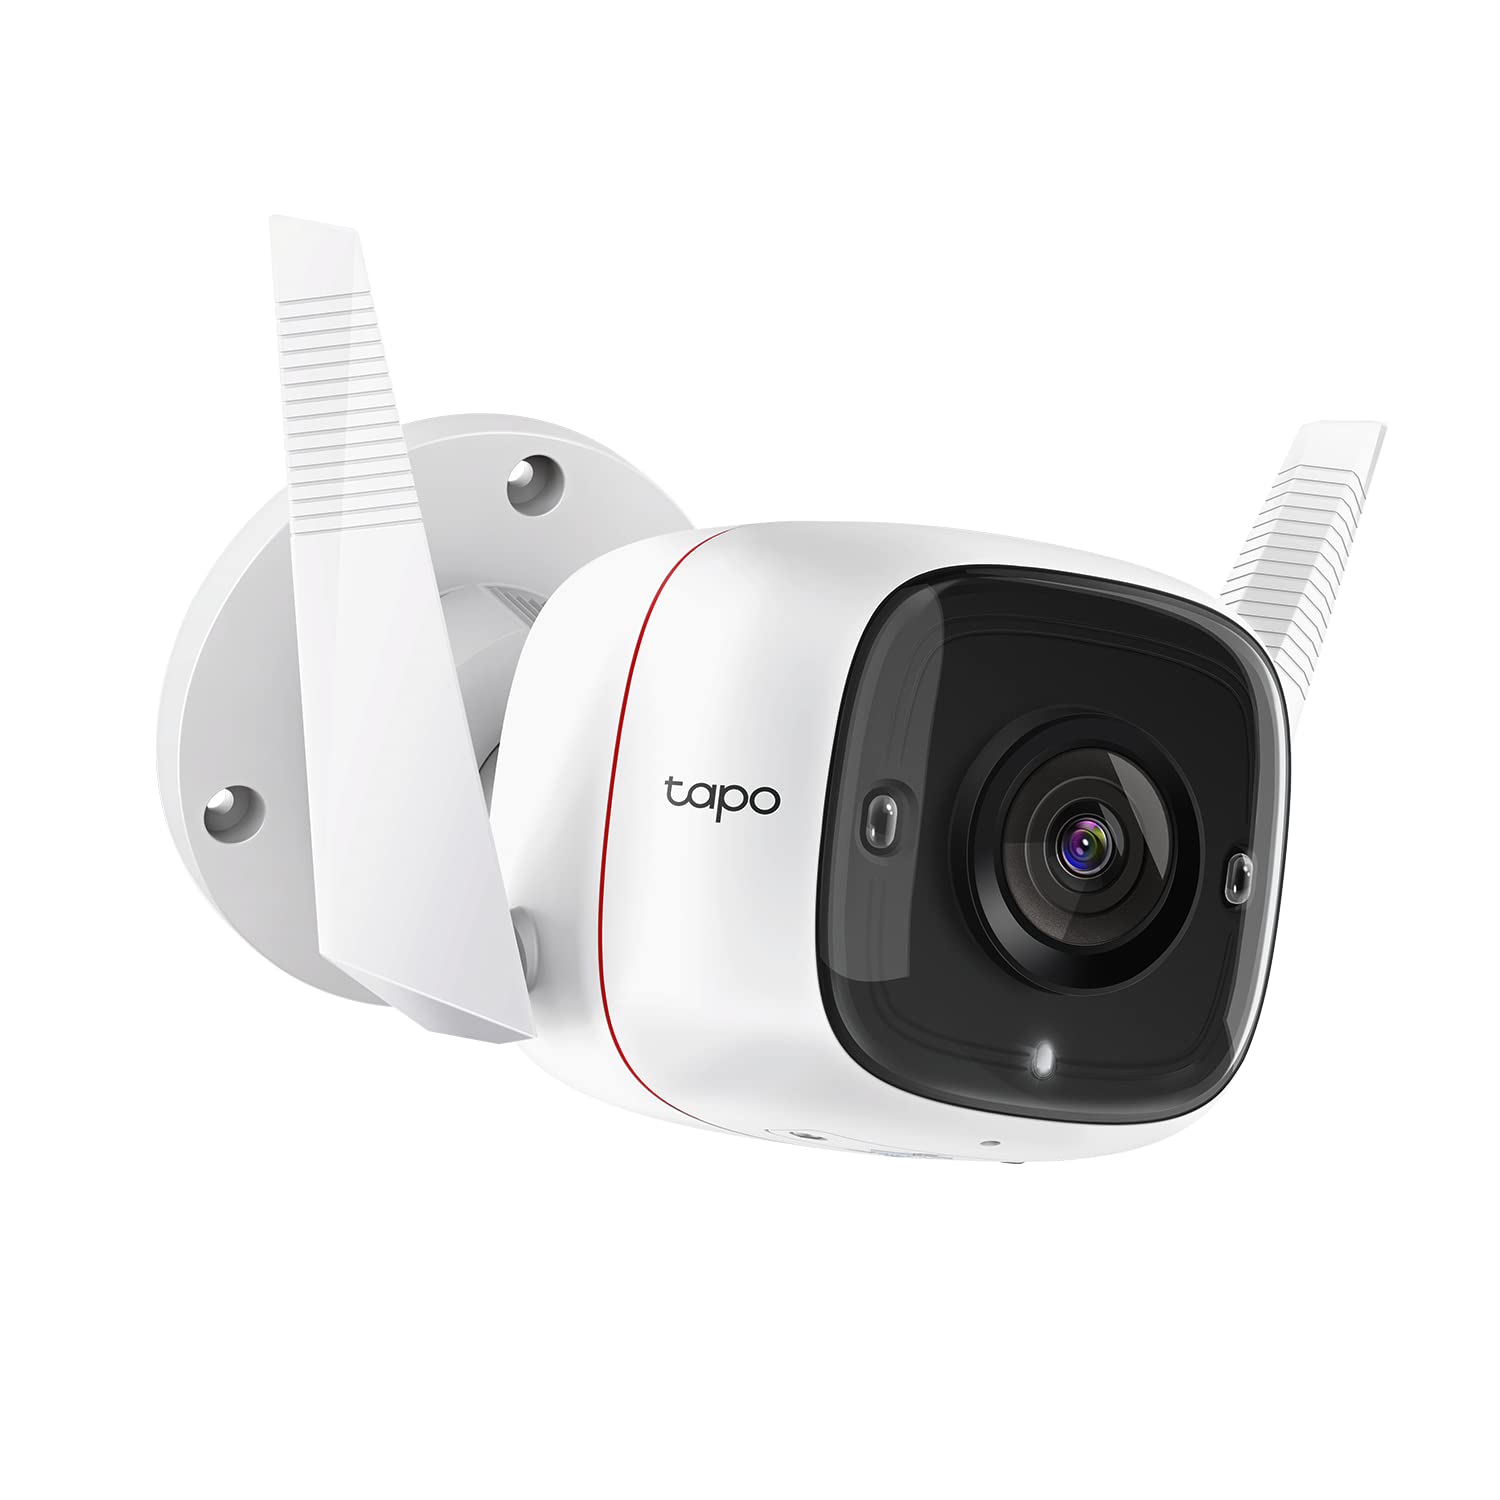 Tapo Wireless or wired outdoor security camera $30